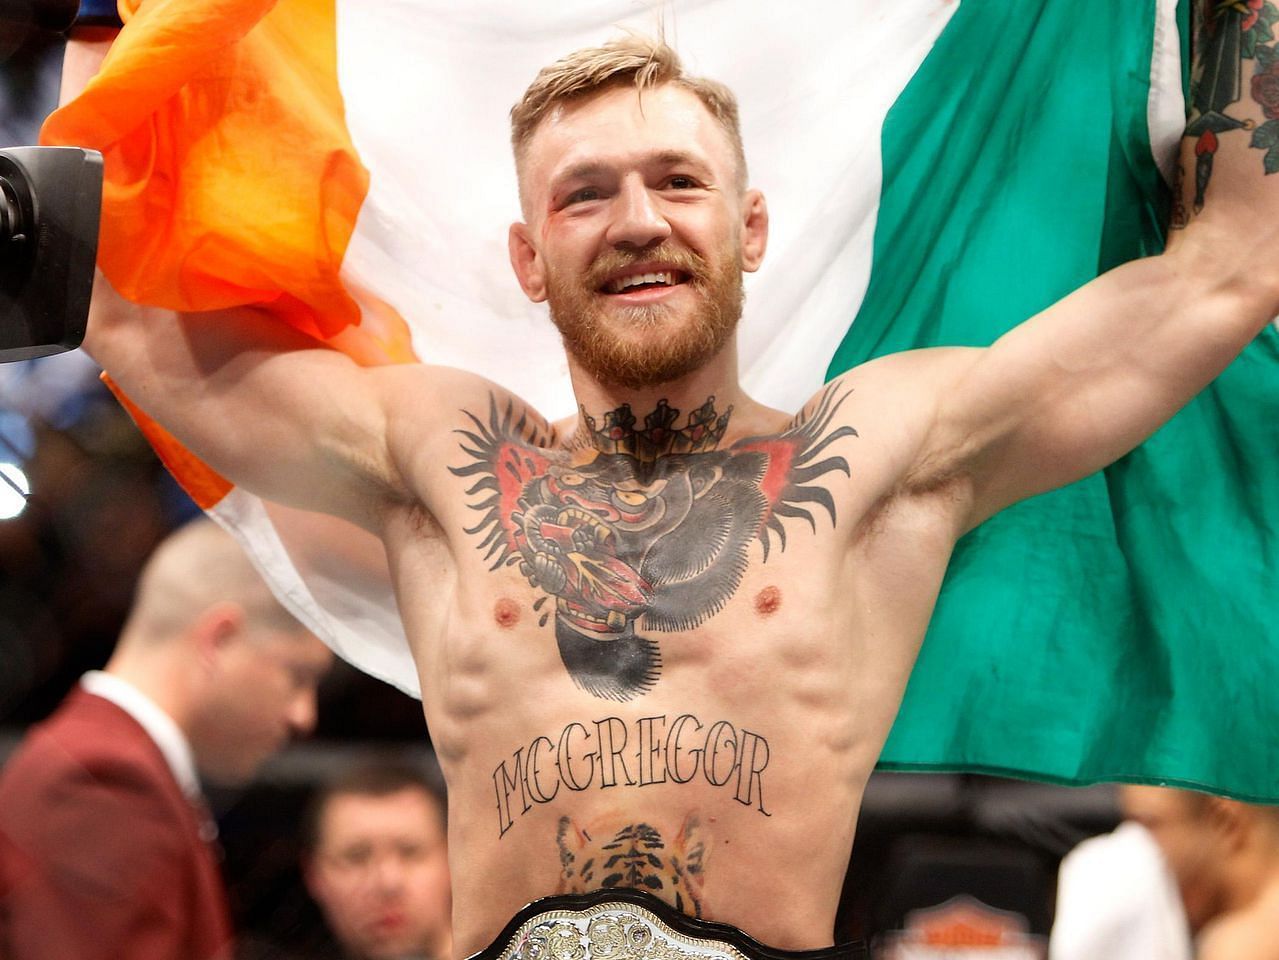 Conor McGregor had the whole country of Ireland behind him during his rise to fame